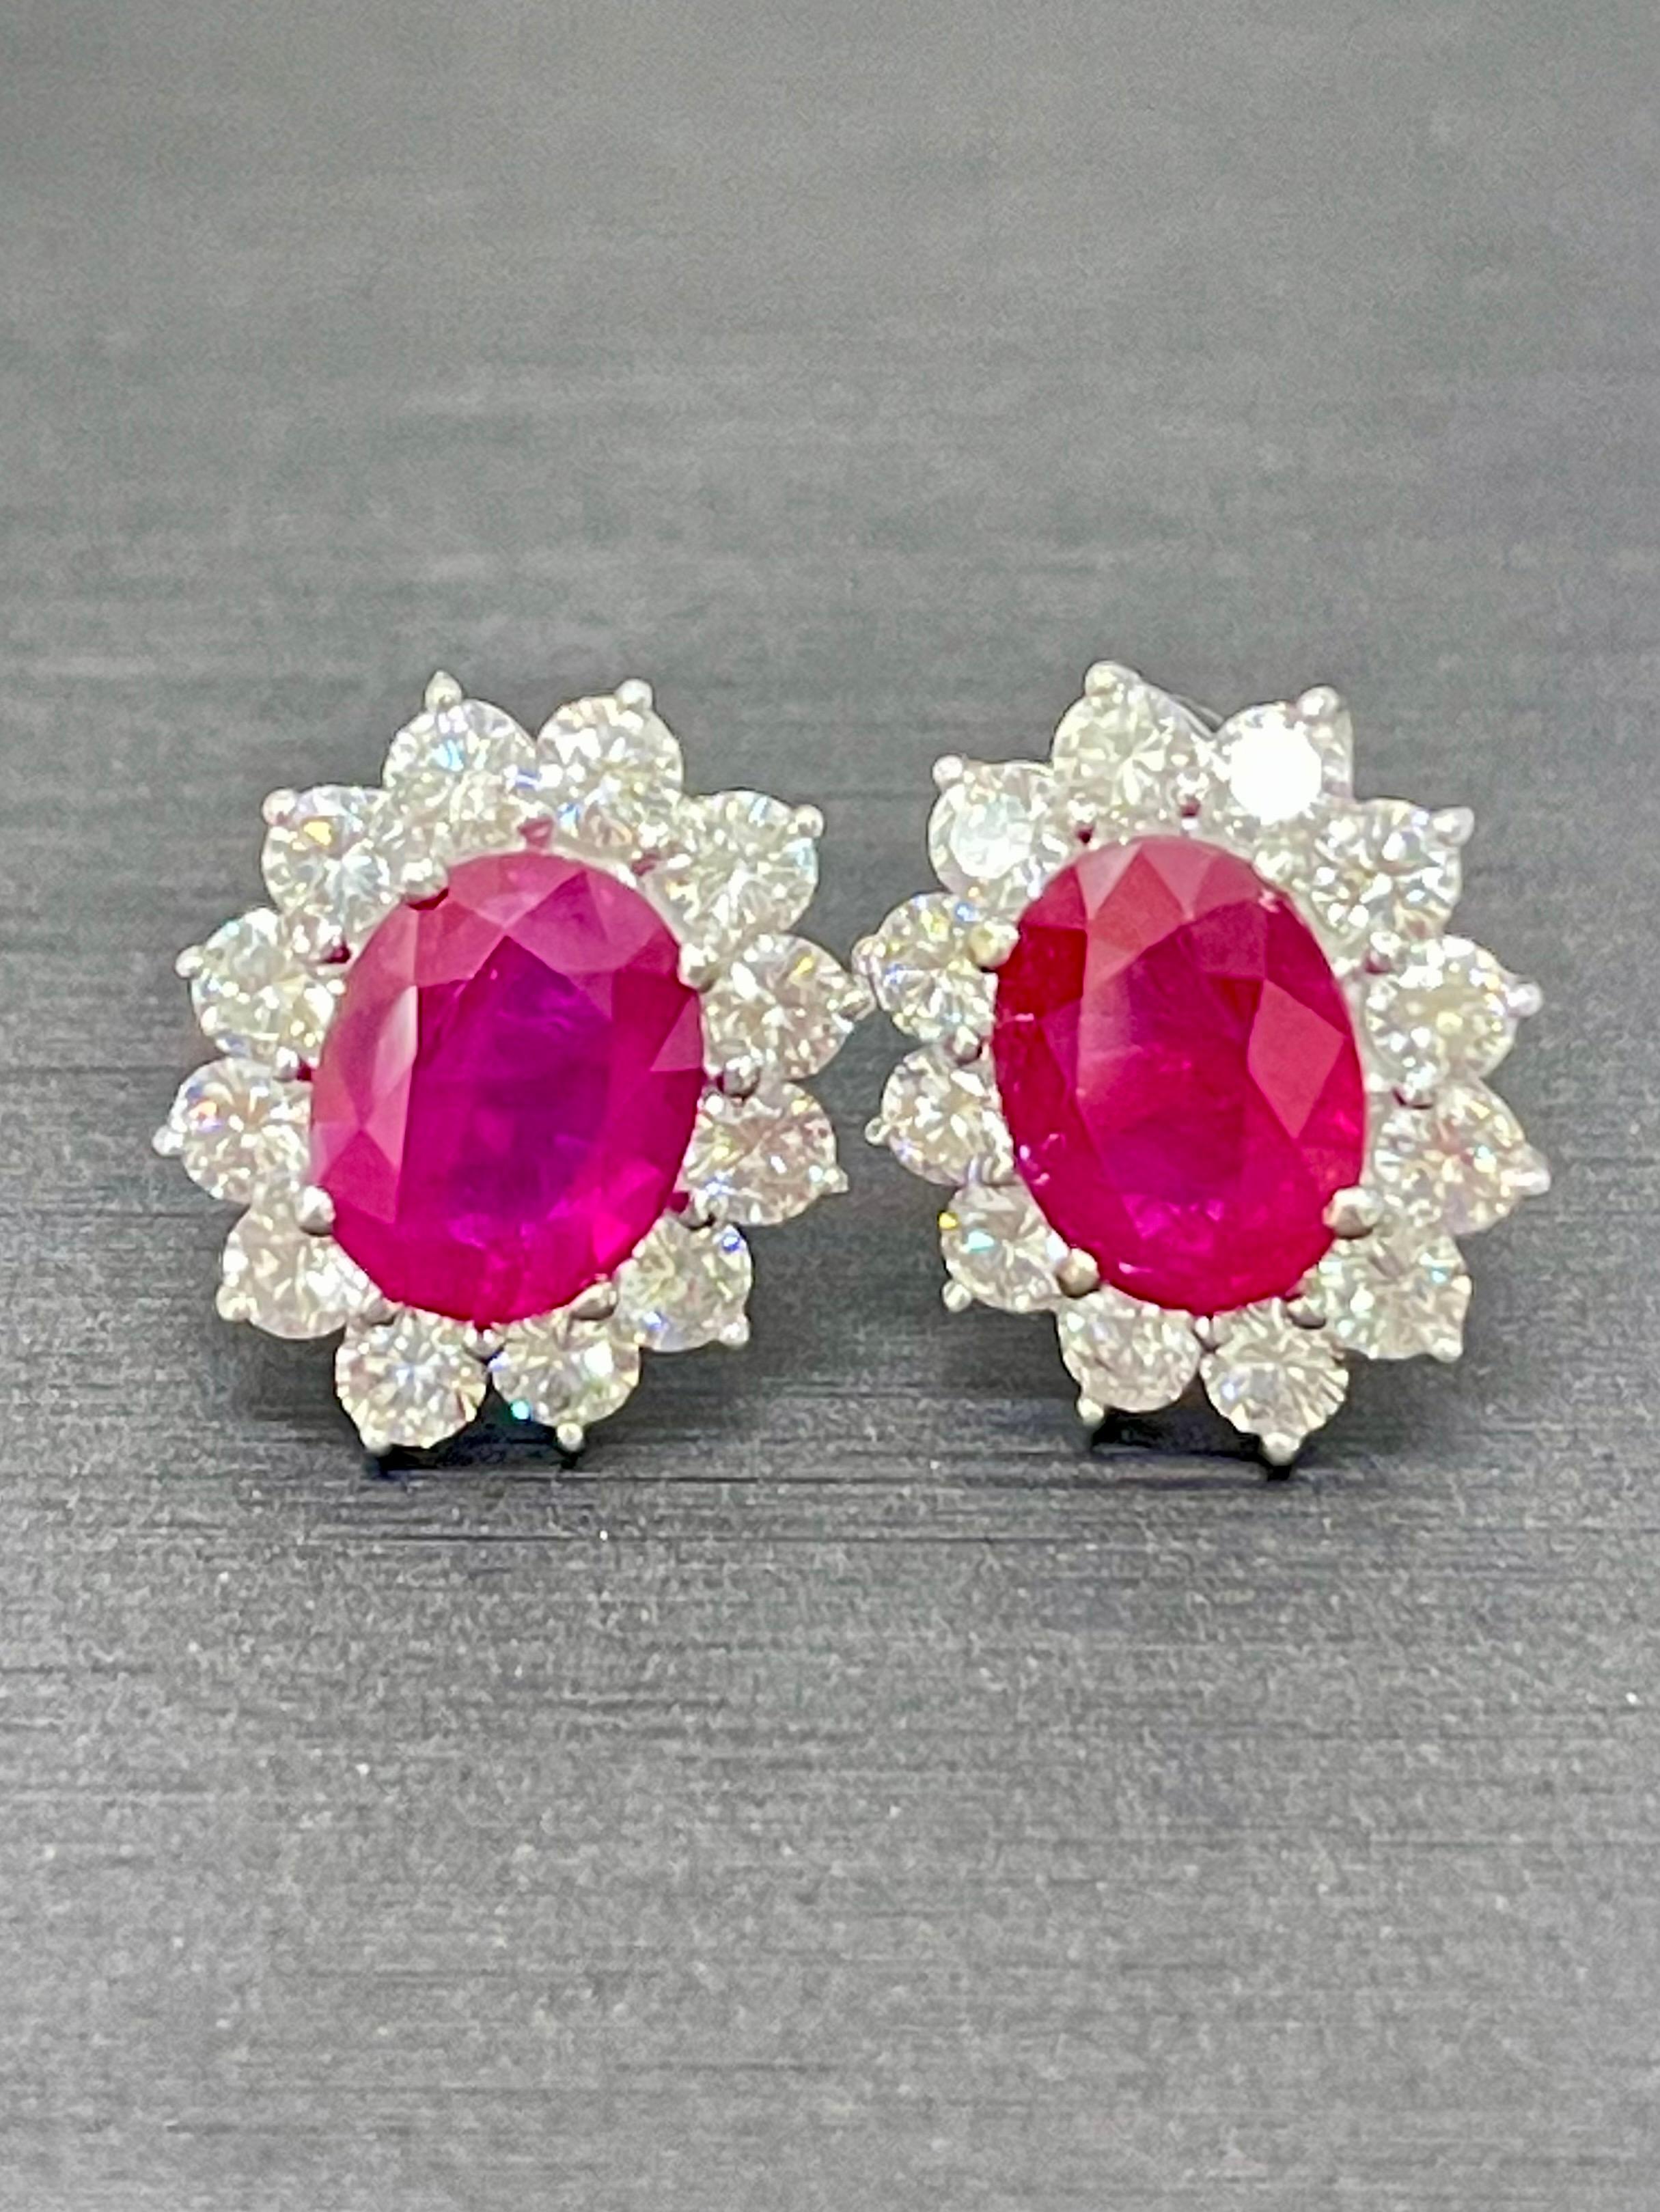 Vivid Red Ruby 4.00 CTW & Diamond Stud Earrings, Close to Pigeon Blood Red 3